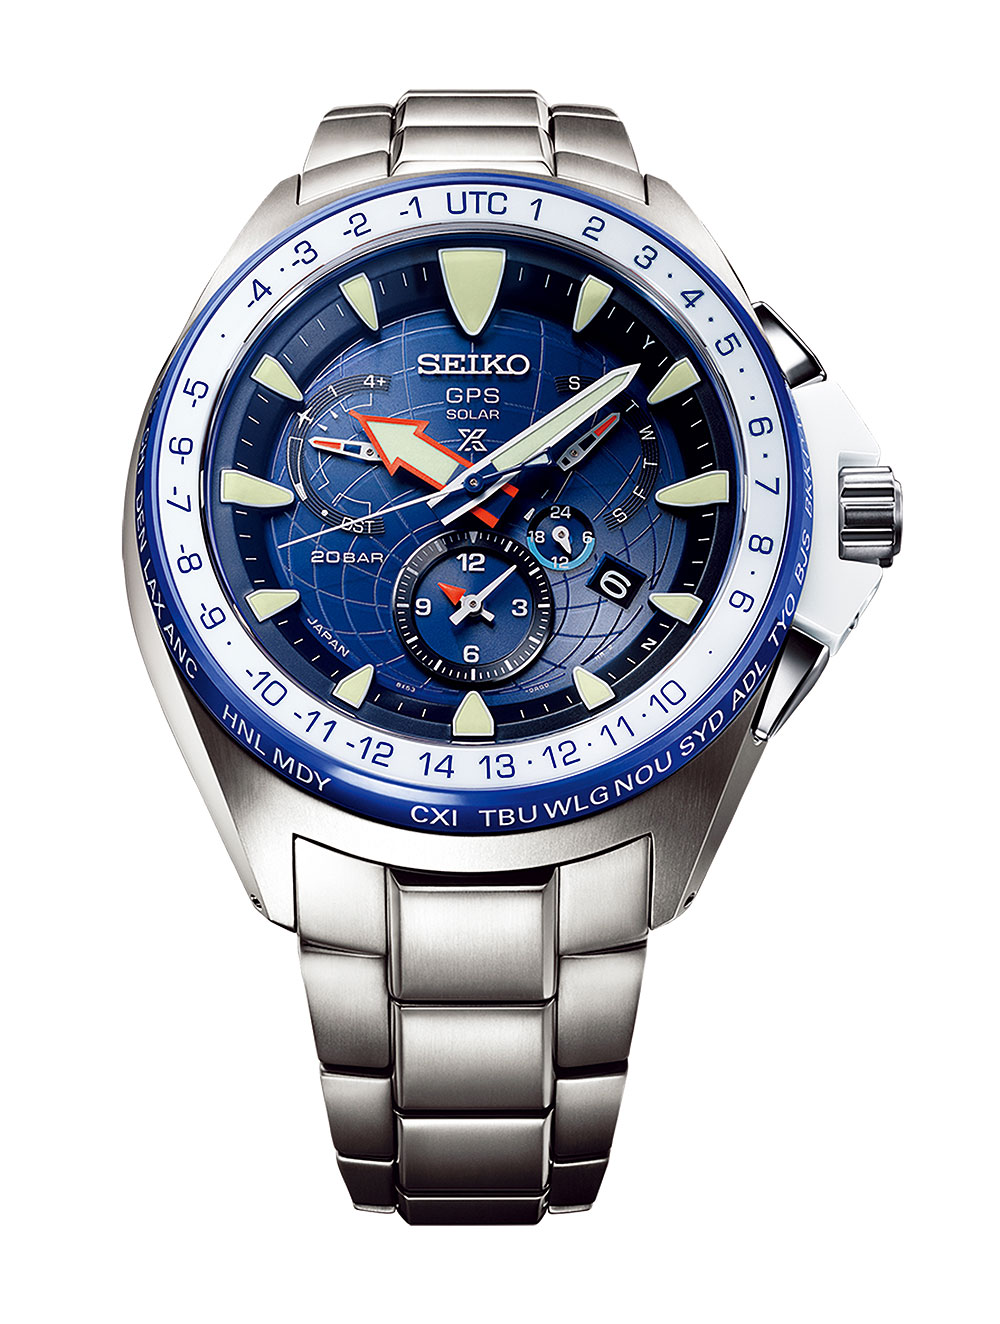 Three Limited-Edition Watches We Found at Seiko's New Miami Design District  Boutique | WatchTime - USA's  Watch Magazine